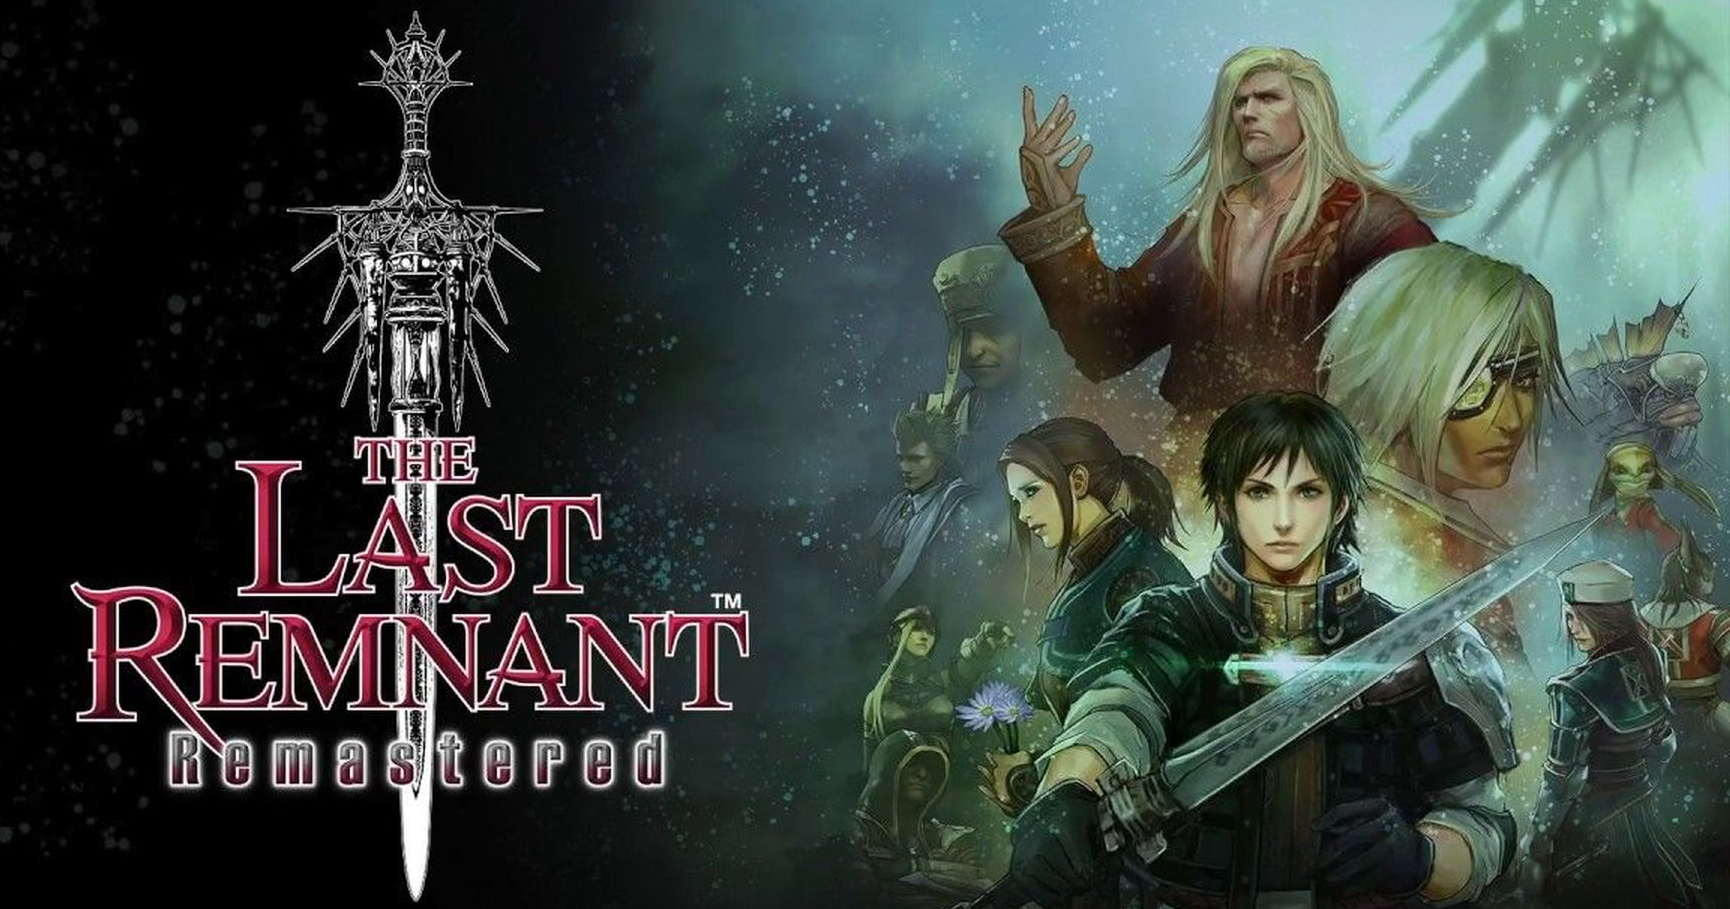 The Last Remnant launched for mobile